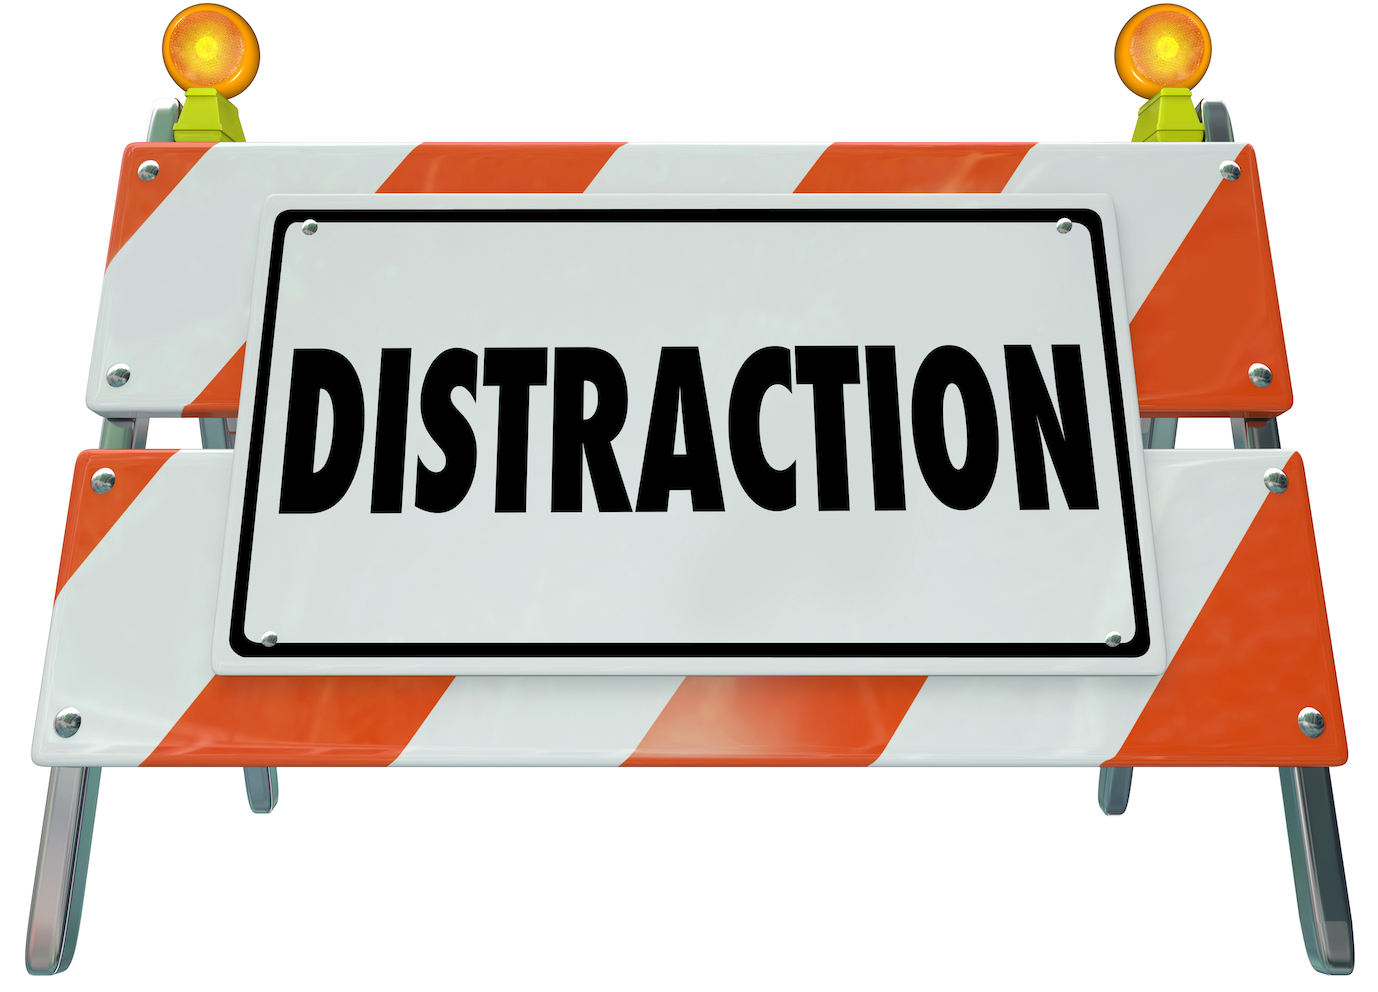 WELLNESS WEDNESDAY #65: The Age of Distraction